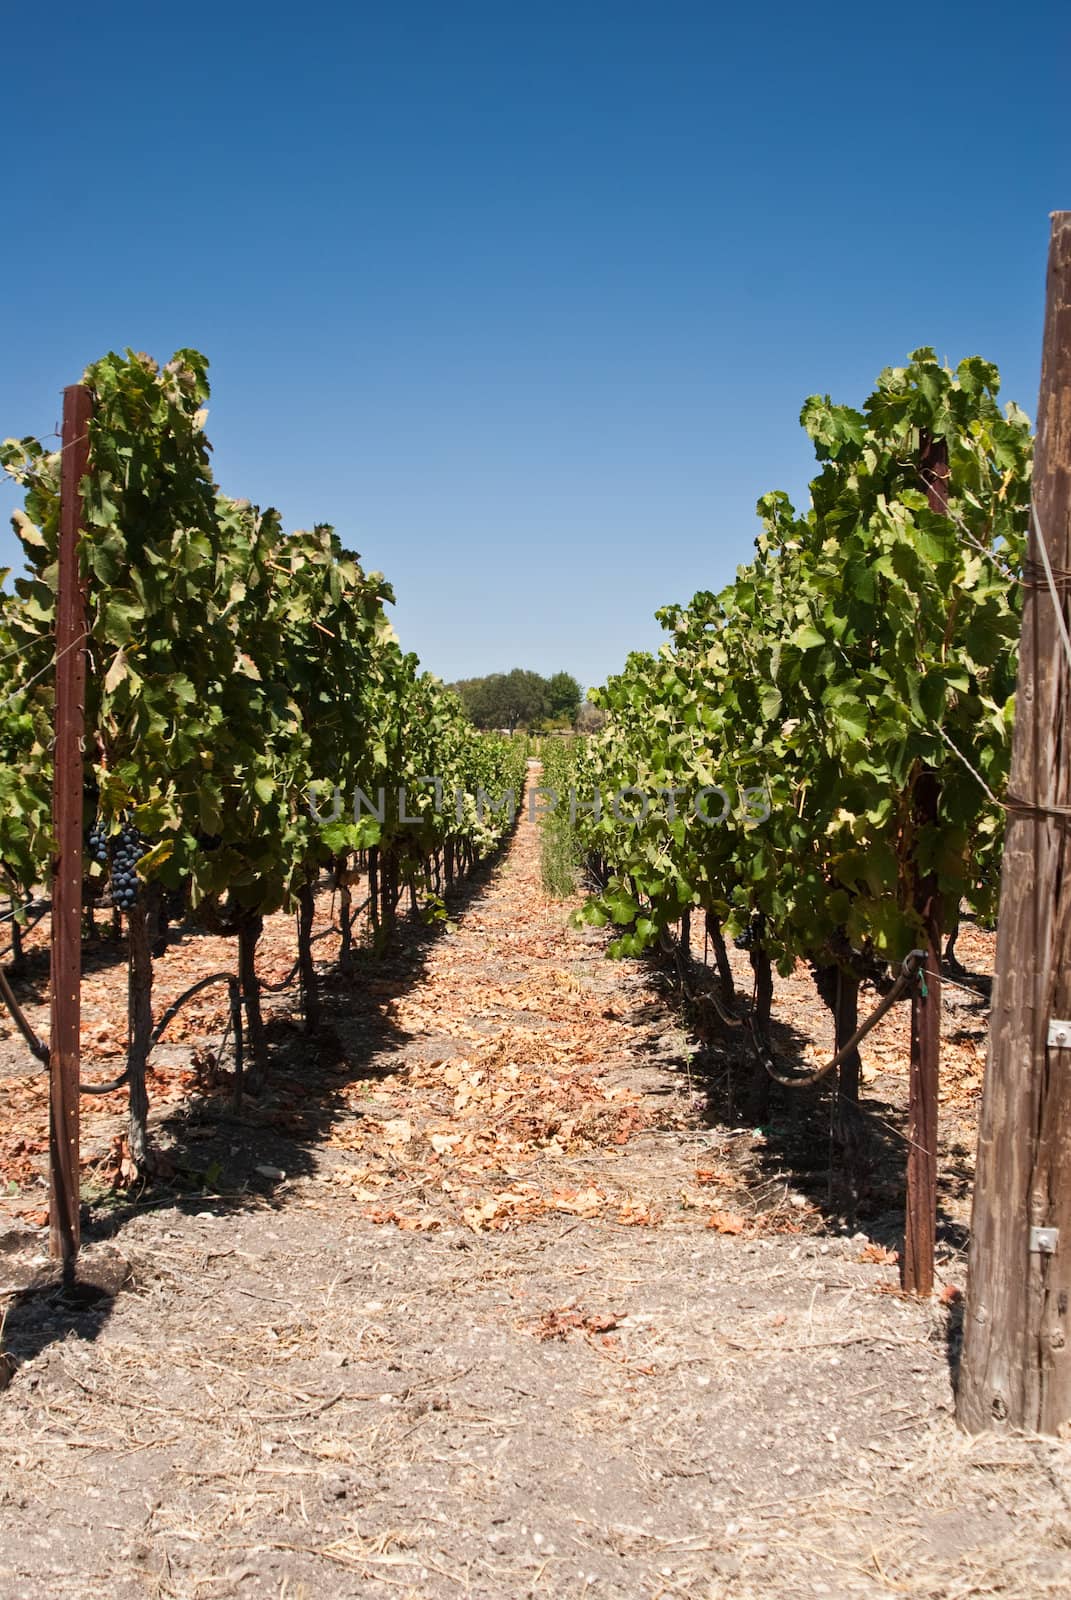 Row of grapes in  California vineyard USA by emattil